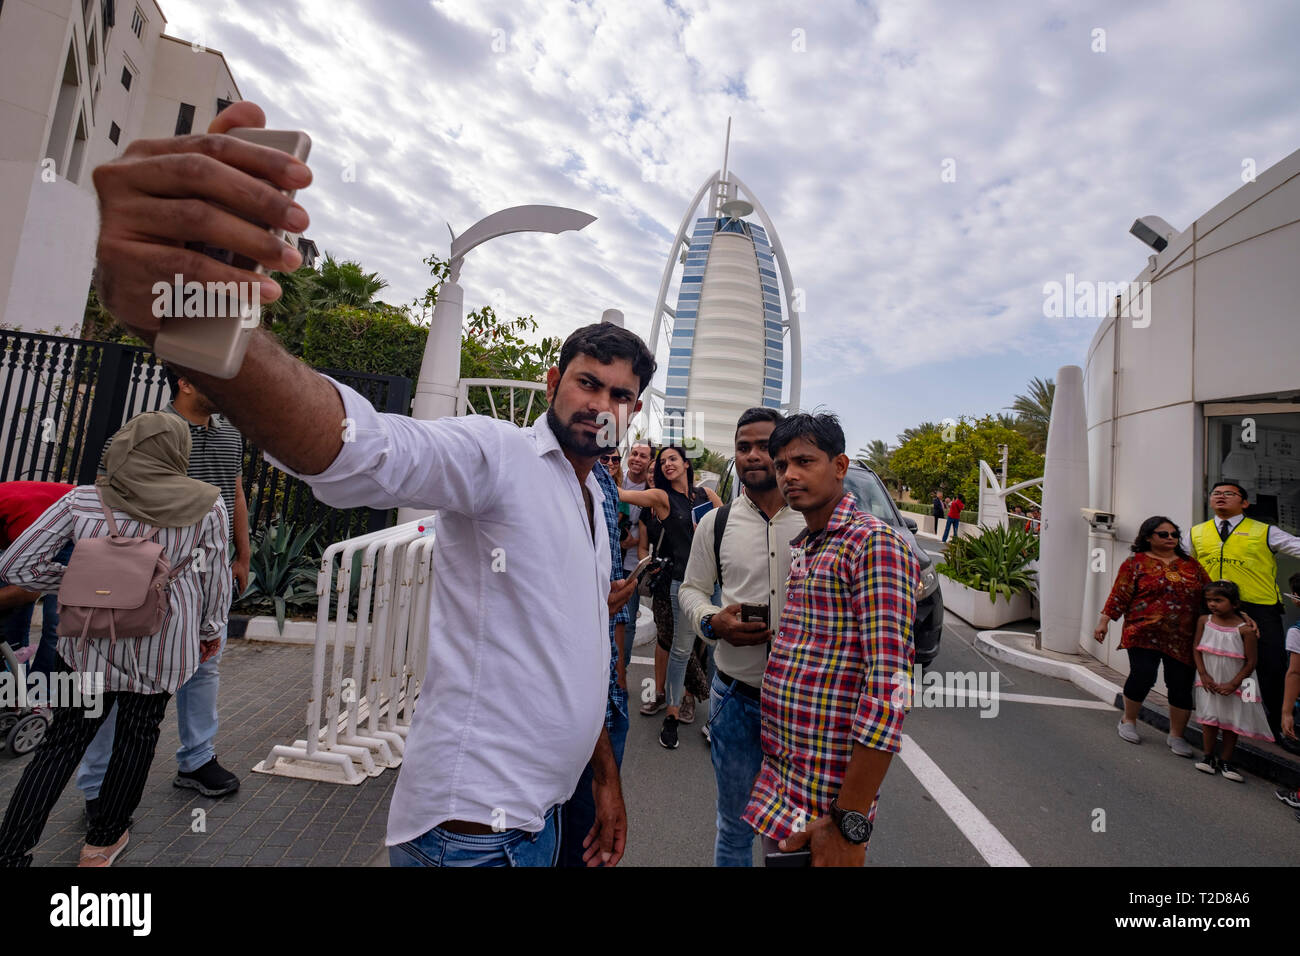 Group of tourists taking a selfie in front of the Burj Al Arab Jumeirah Hotel in Dubai, United Arab Emirates Stock Photo